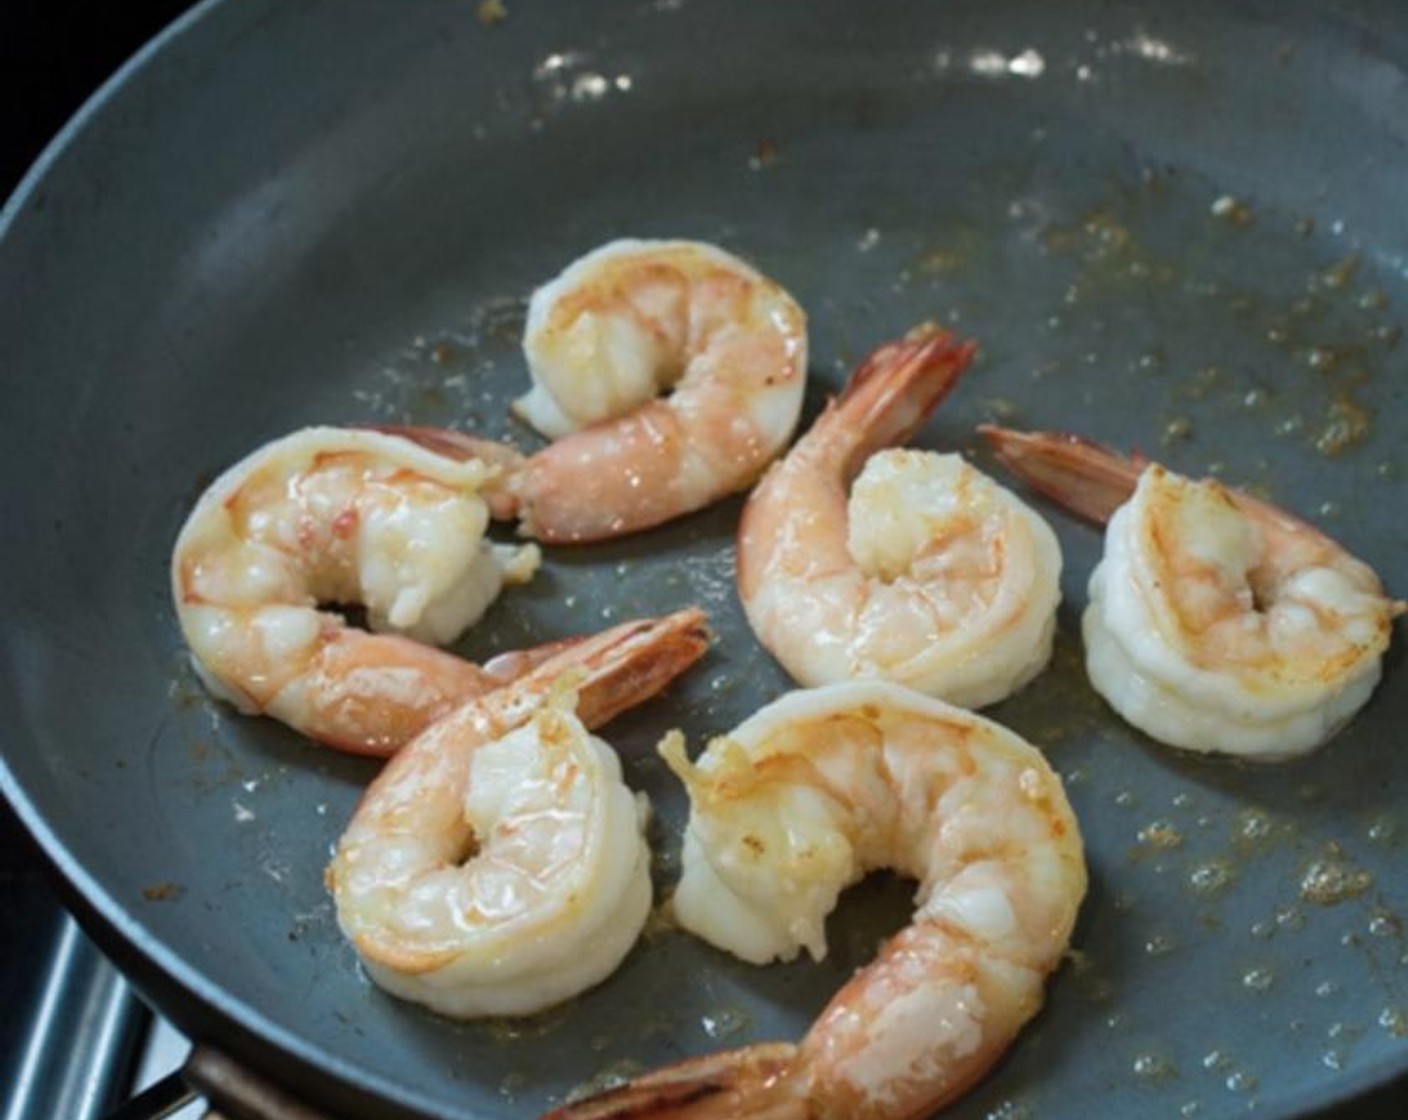 step 5 Place a separate shallow frying pan on your stove-top over medium-high heat. Pour 2 tablespoons of the garlic oil in this frying pan, then pan-fry the Large Shrimp (12) in batches. Set the shrimp aside when fully cooked.